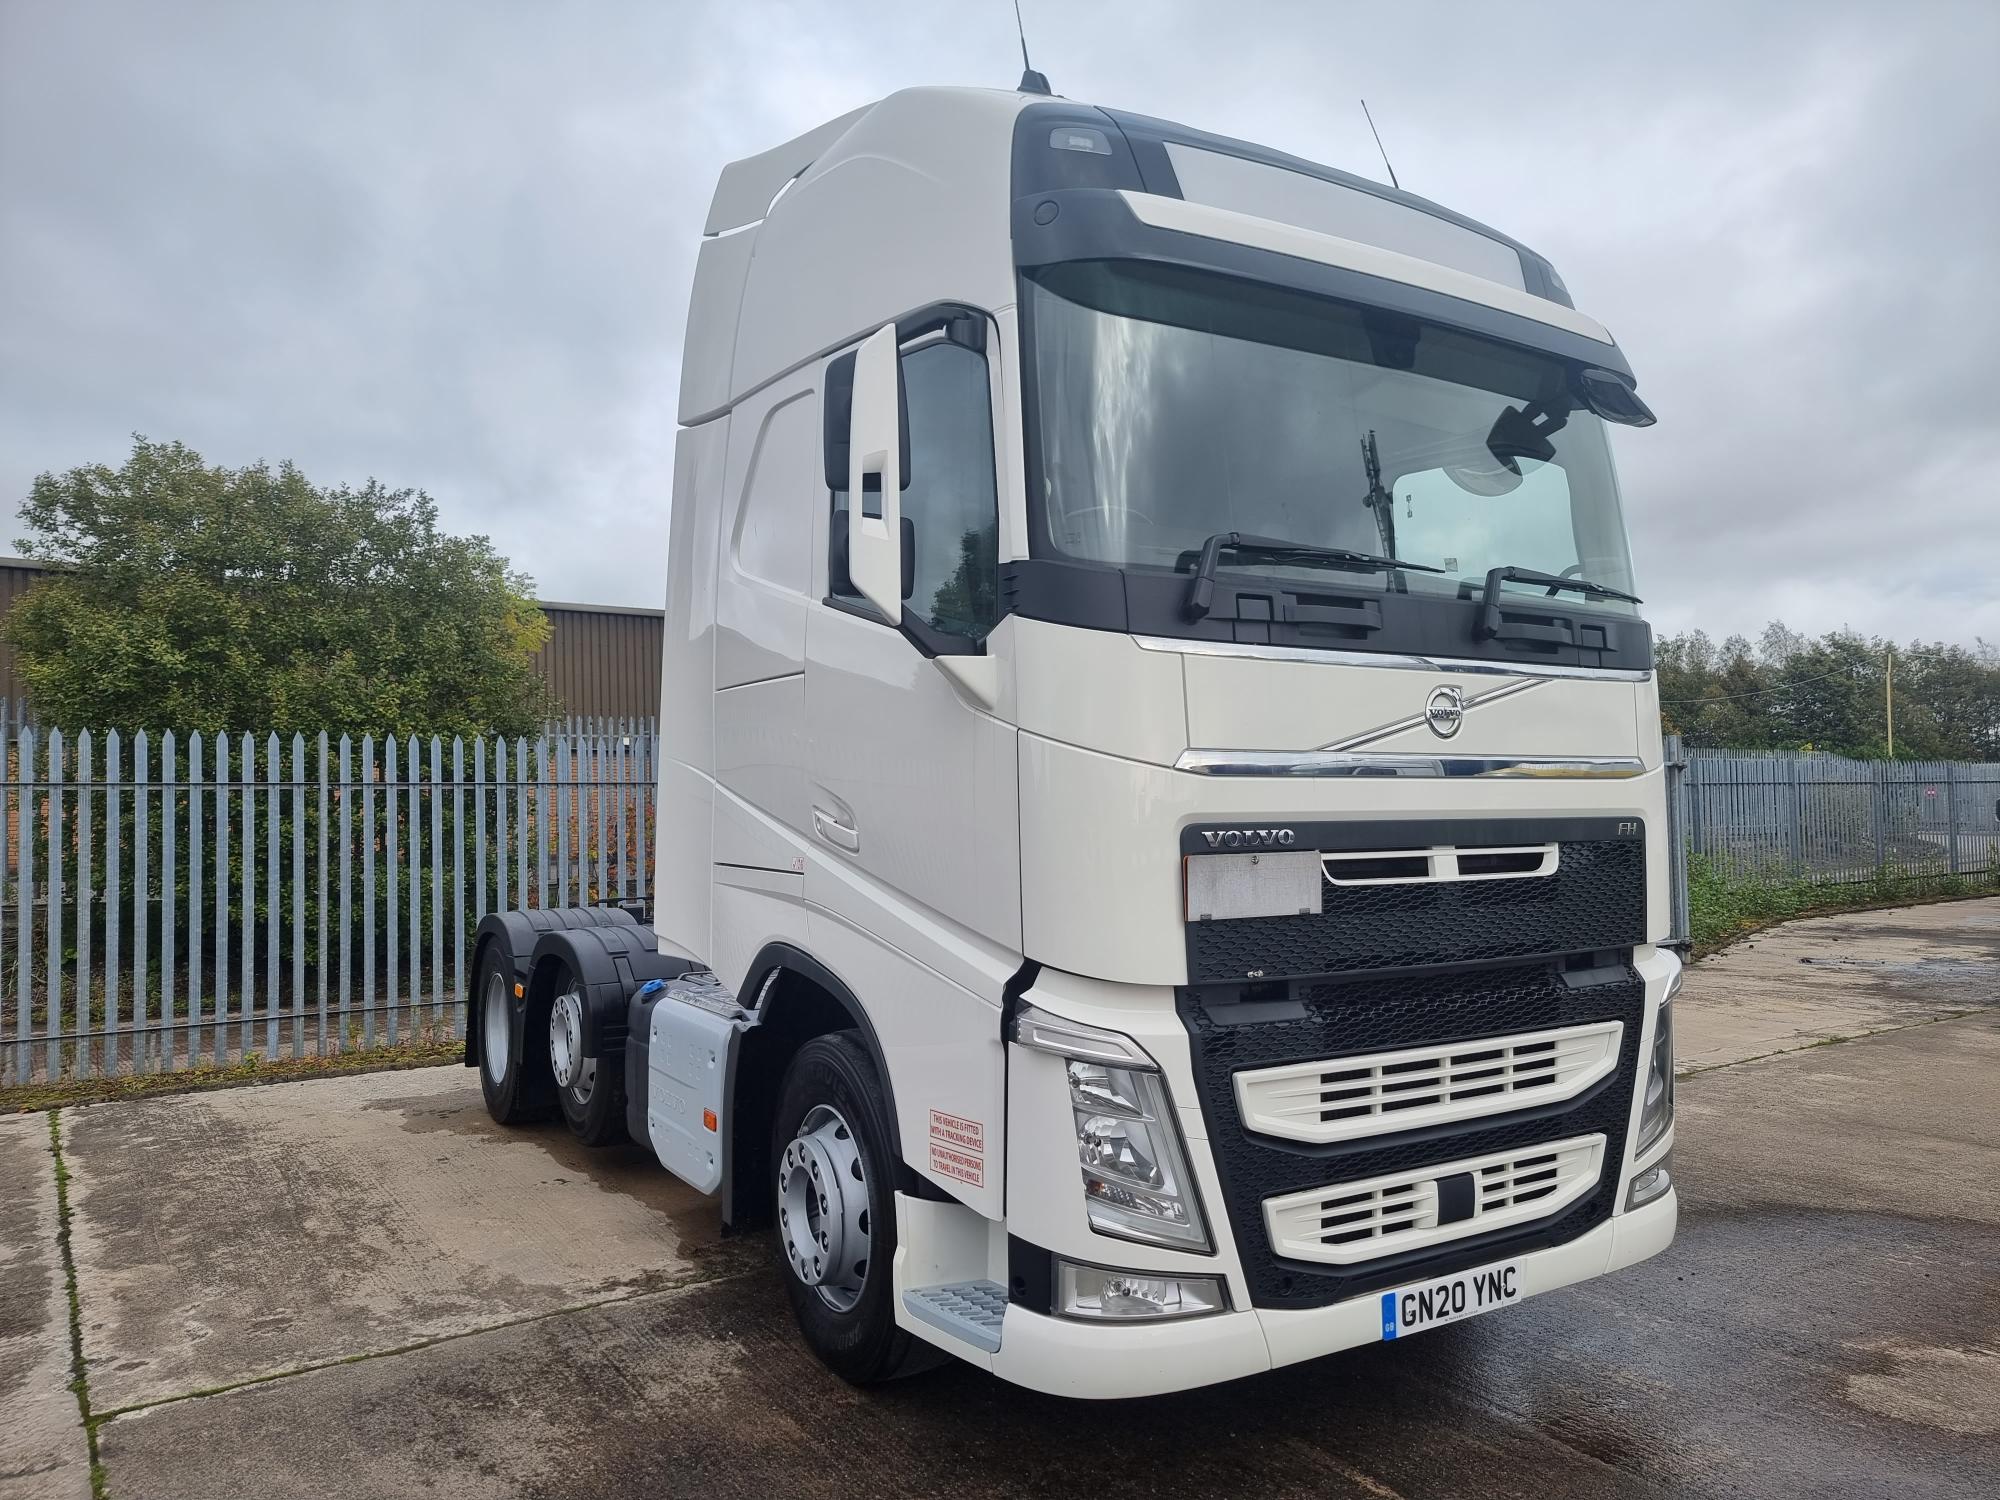 2020 Volvo FH500, Factory White, Euro 6, 500bhp, 4.1m Wheelbase, Automatic Gearbox, Single Bunk, Leather Trim, Overhead and Under Bunk Storage, Night Heater, Cruise Control, Fridge, Electric Mirrors, Factory Fitted DVS, Sat Nav Radio and TV Prep. Finance & Warranty Options Available.